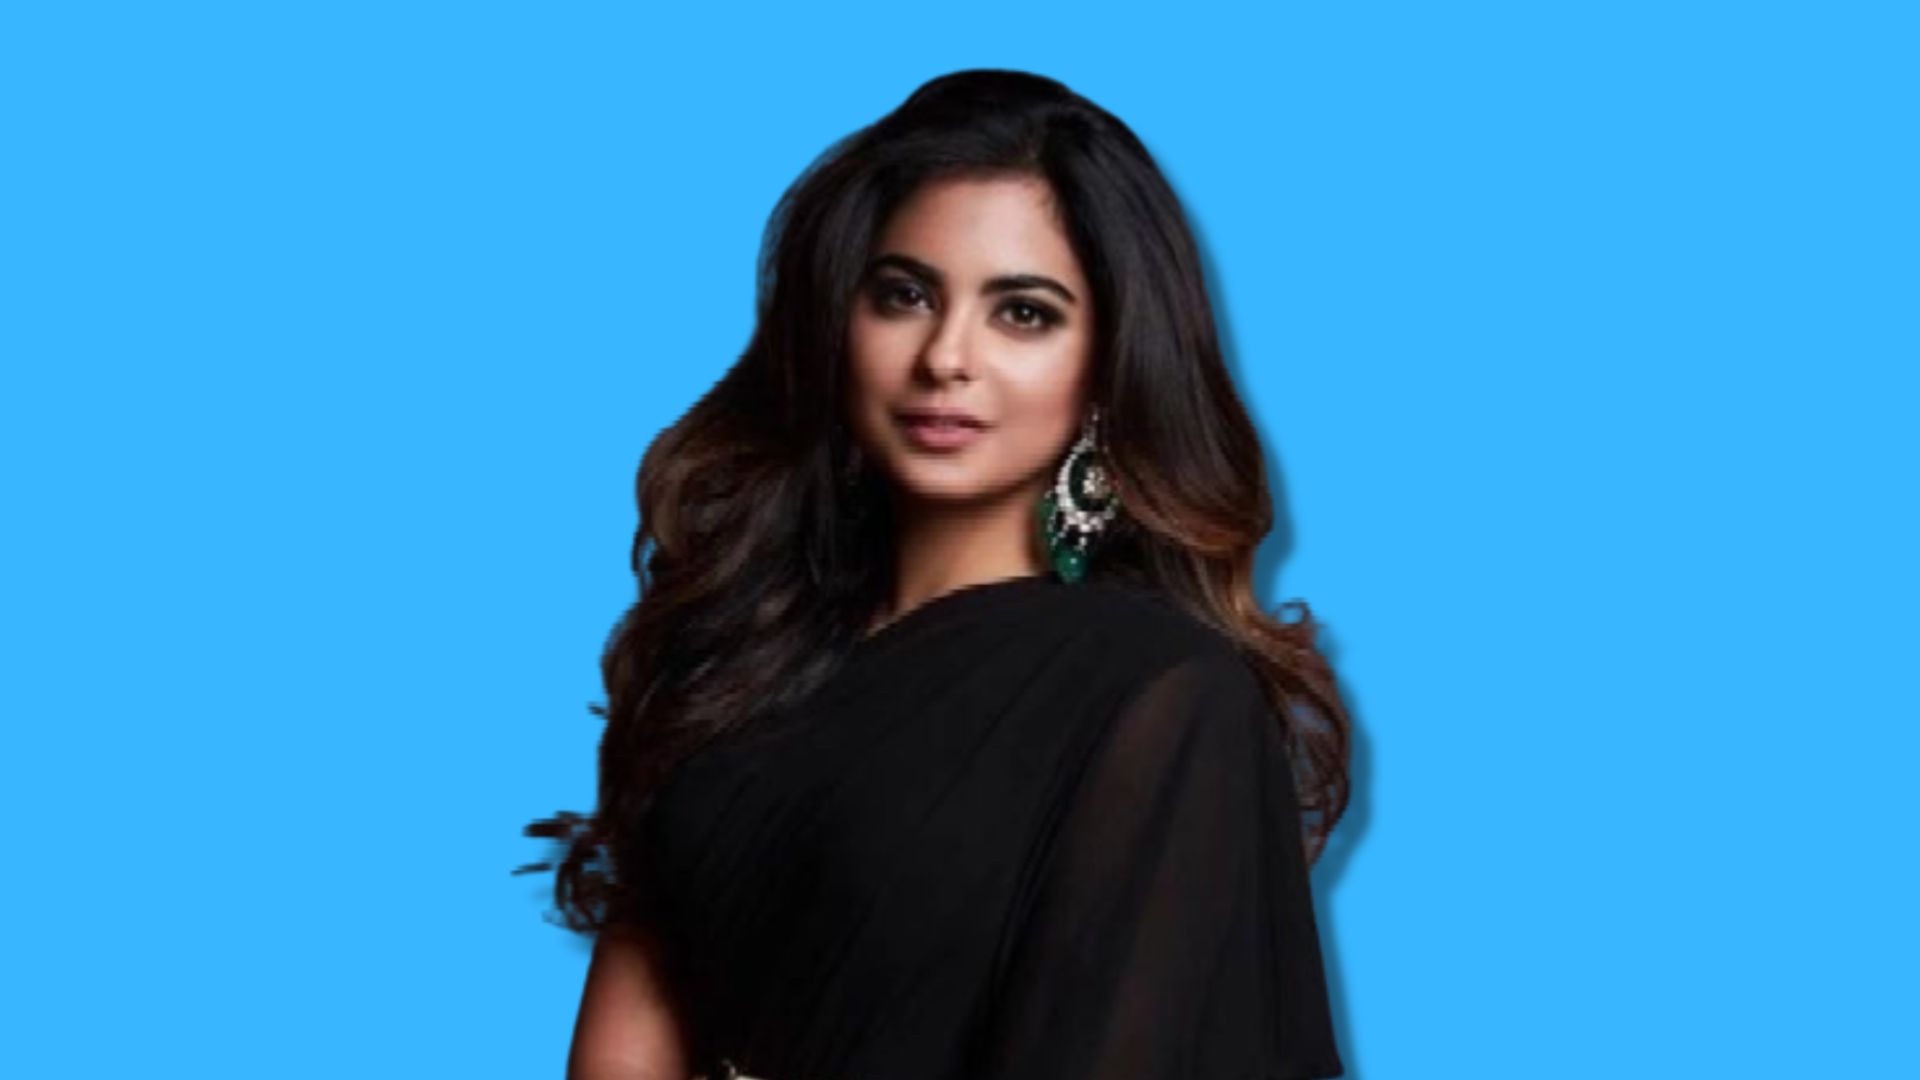 Reliance Launches First In-House Fashion Store Led By Isha Ambani